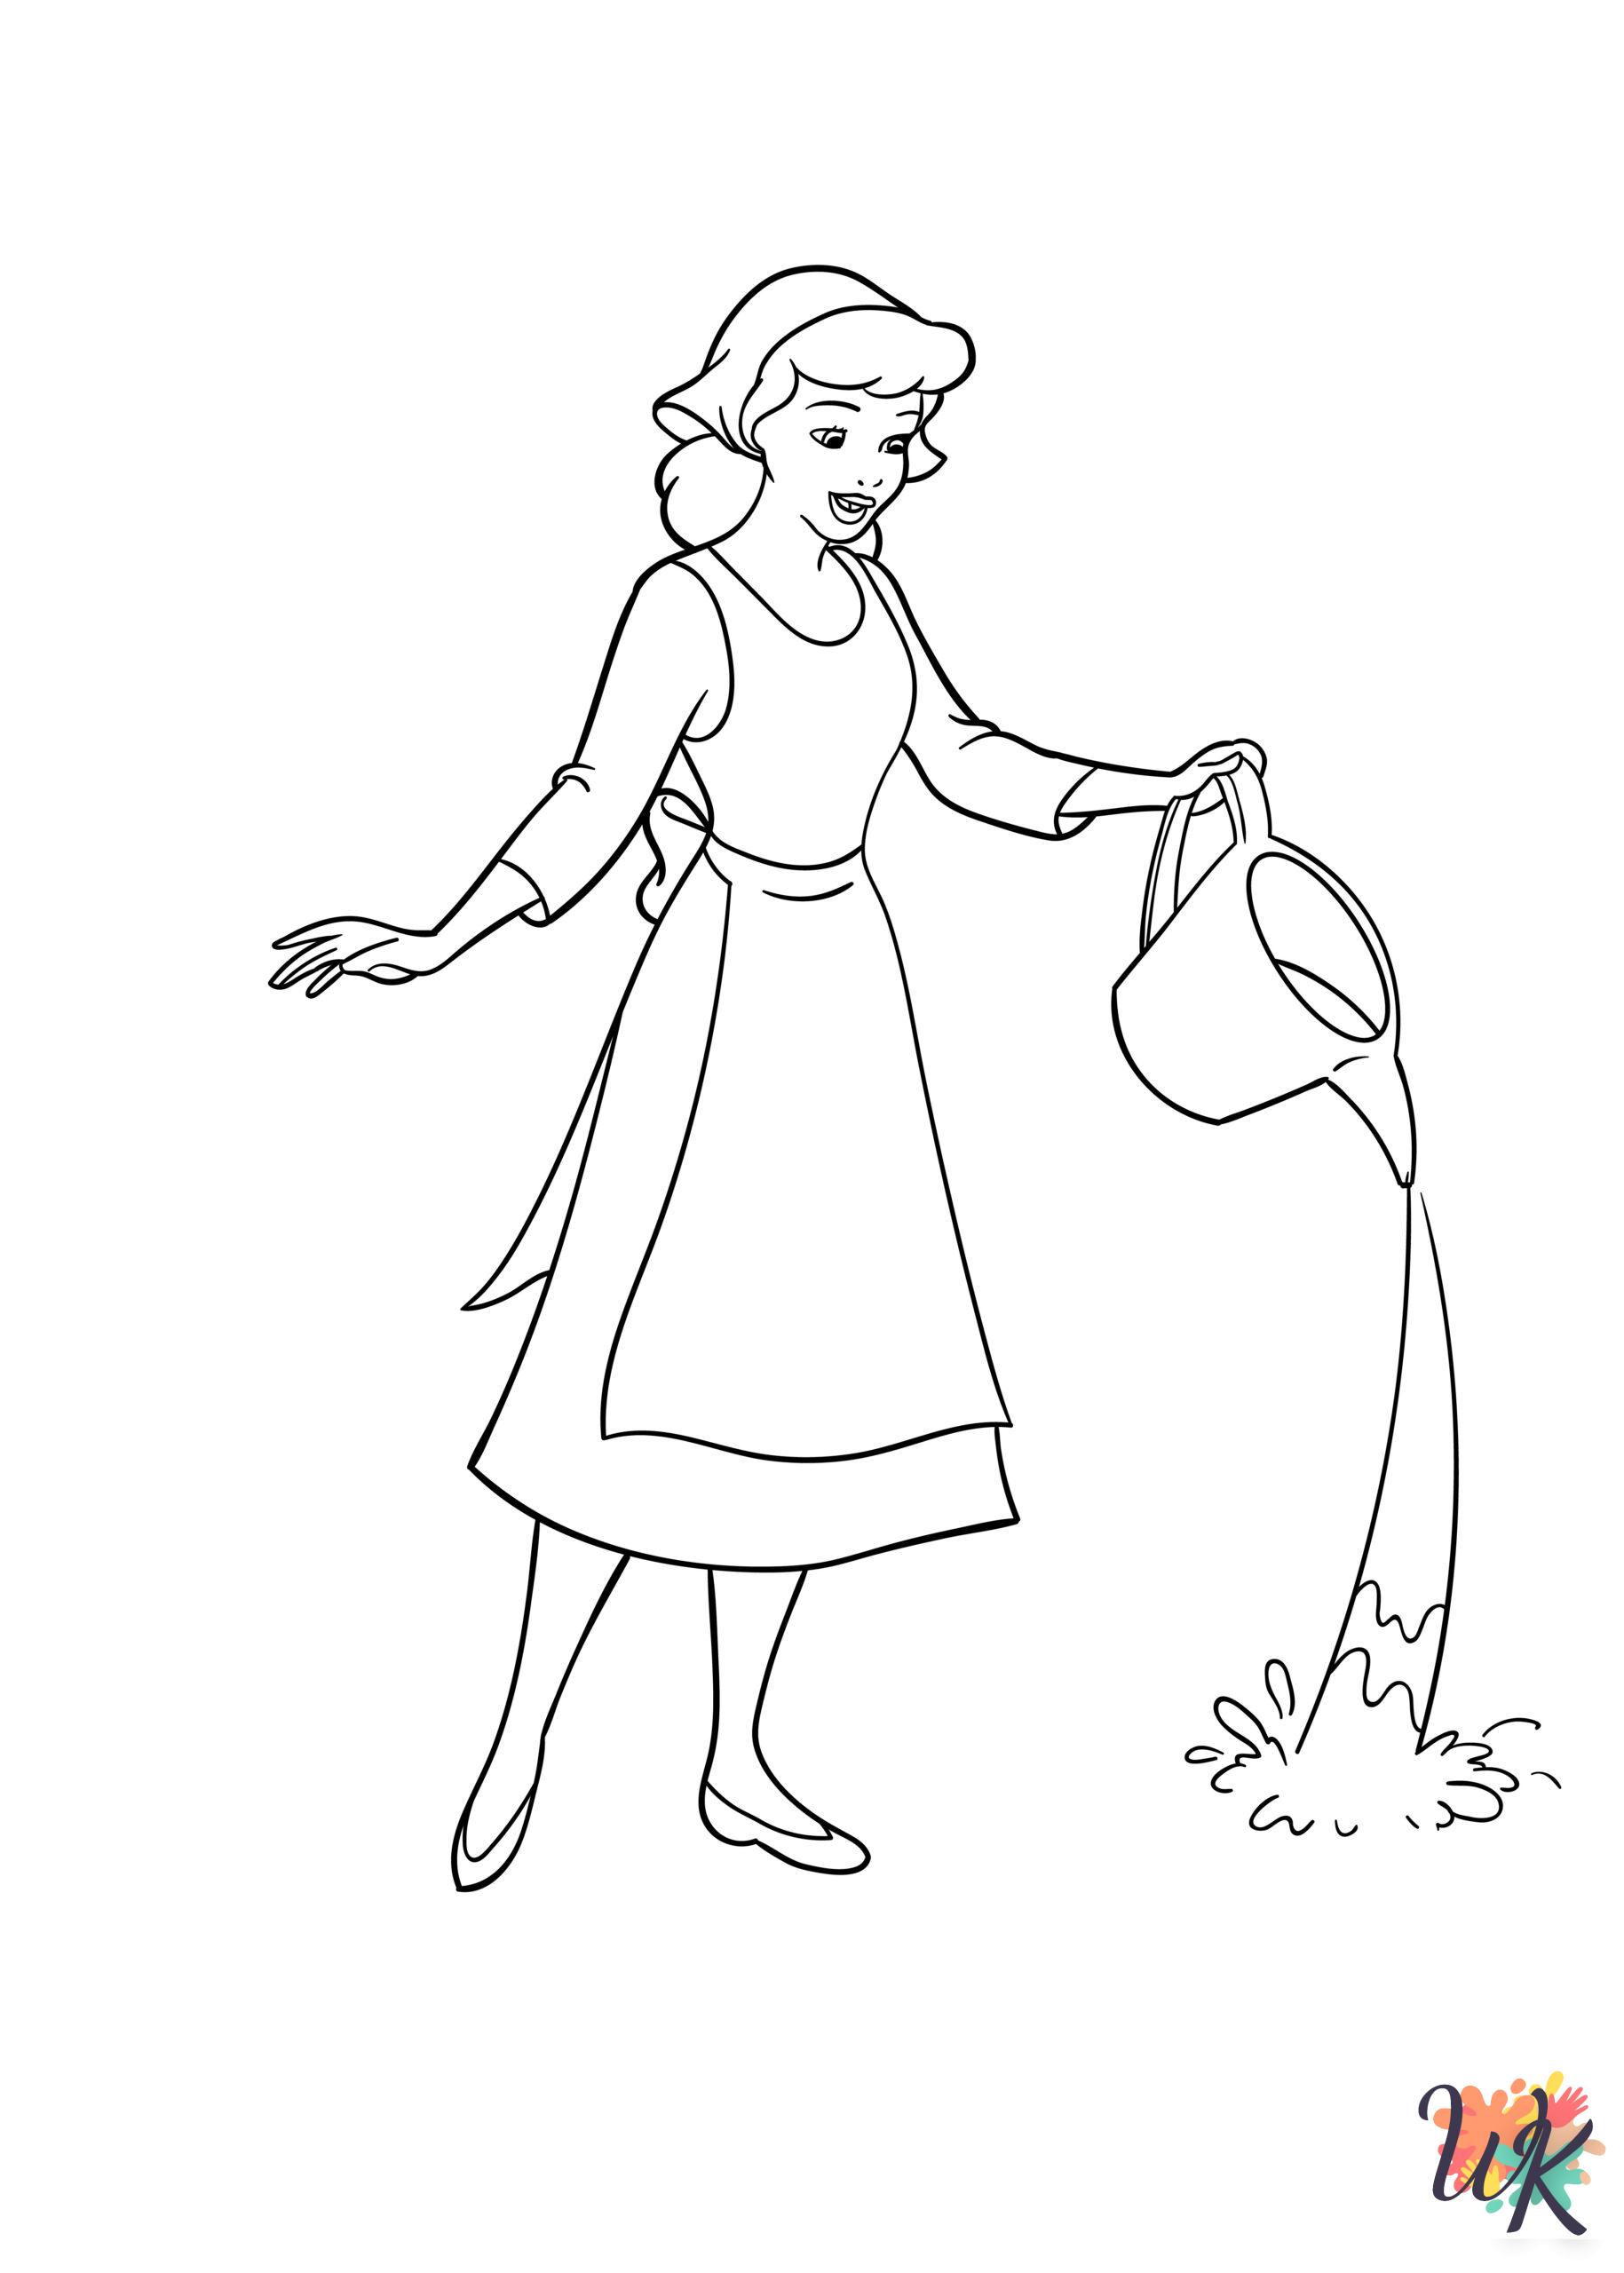 merry Cinderella coloring pages